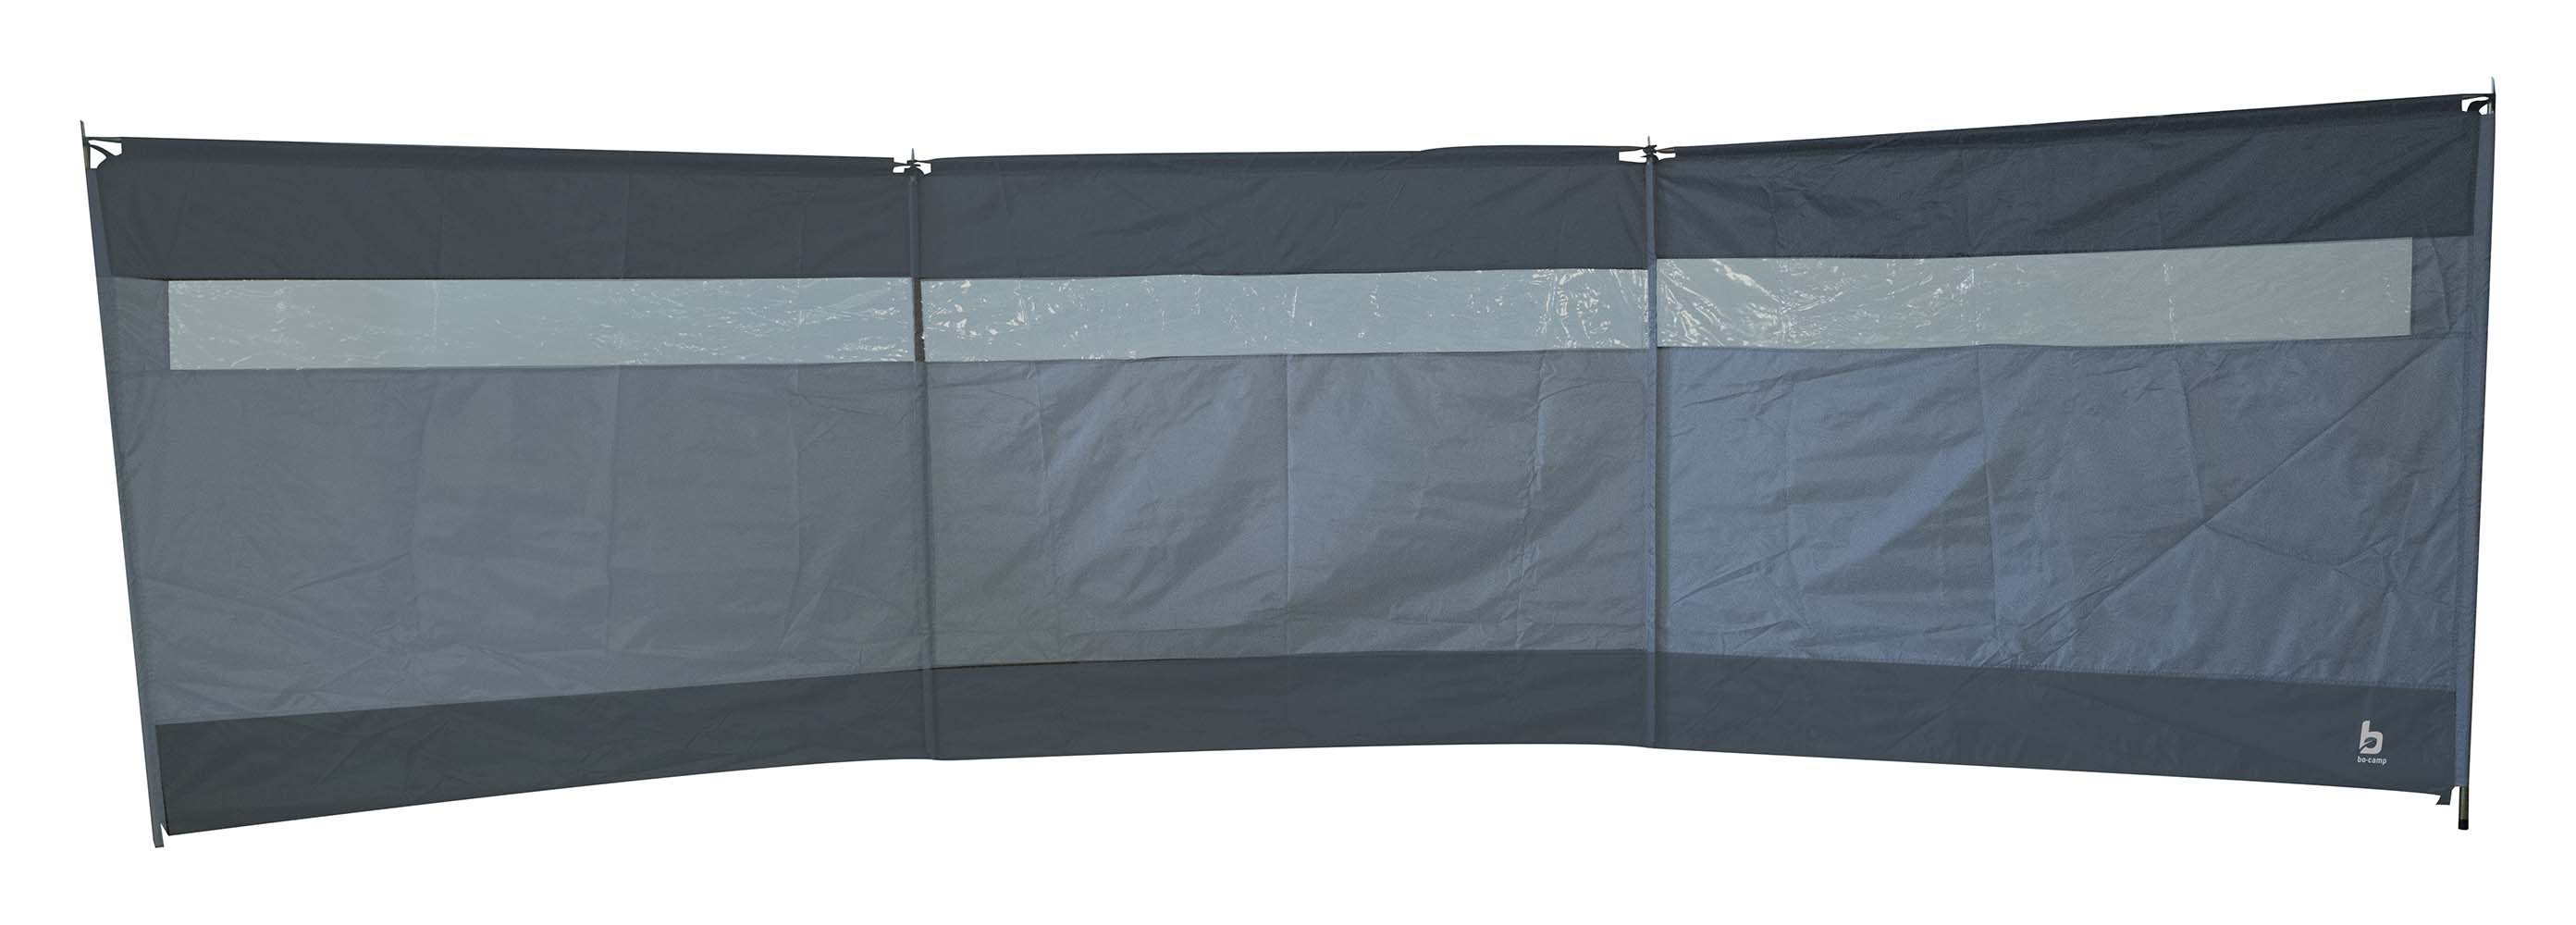 4367643 Extra sold and weather proof 3 part wind screen. This wind screen is extra solid due the UV-resistant coating and the thicker canvas, which also ensures added stability. The wind screen also has top beams and a sturdy PVC frame. Ideal against the wind, the sun or to keep things out of sight. Because the windscreen consists of 3 compartments the angle can be adjusted to any situation. The screen has a modern look. Supplied with a carry bag, guy ropes and thicker pegs.